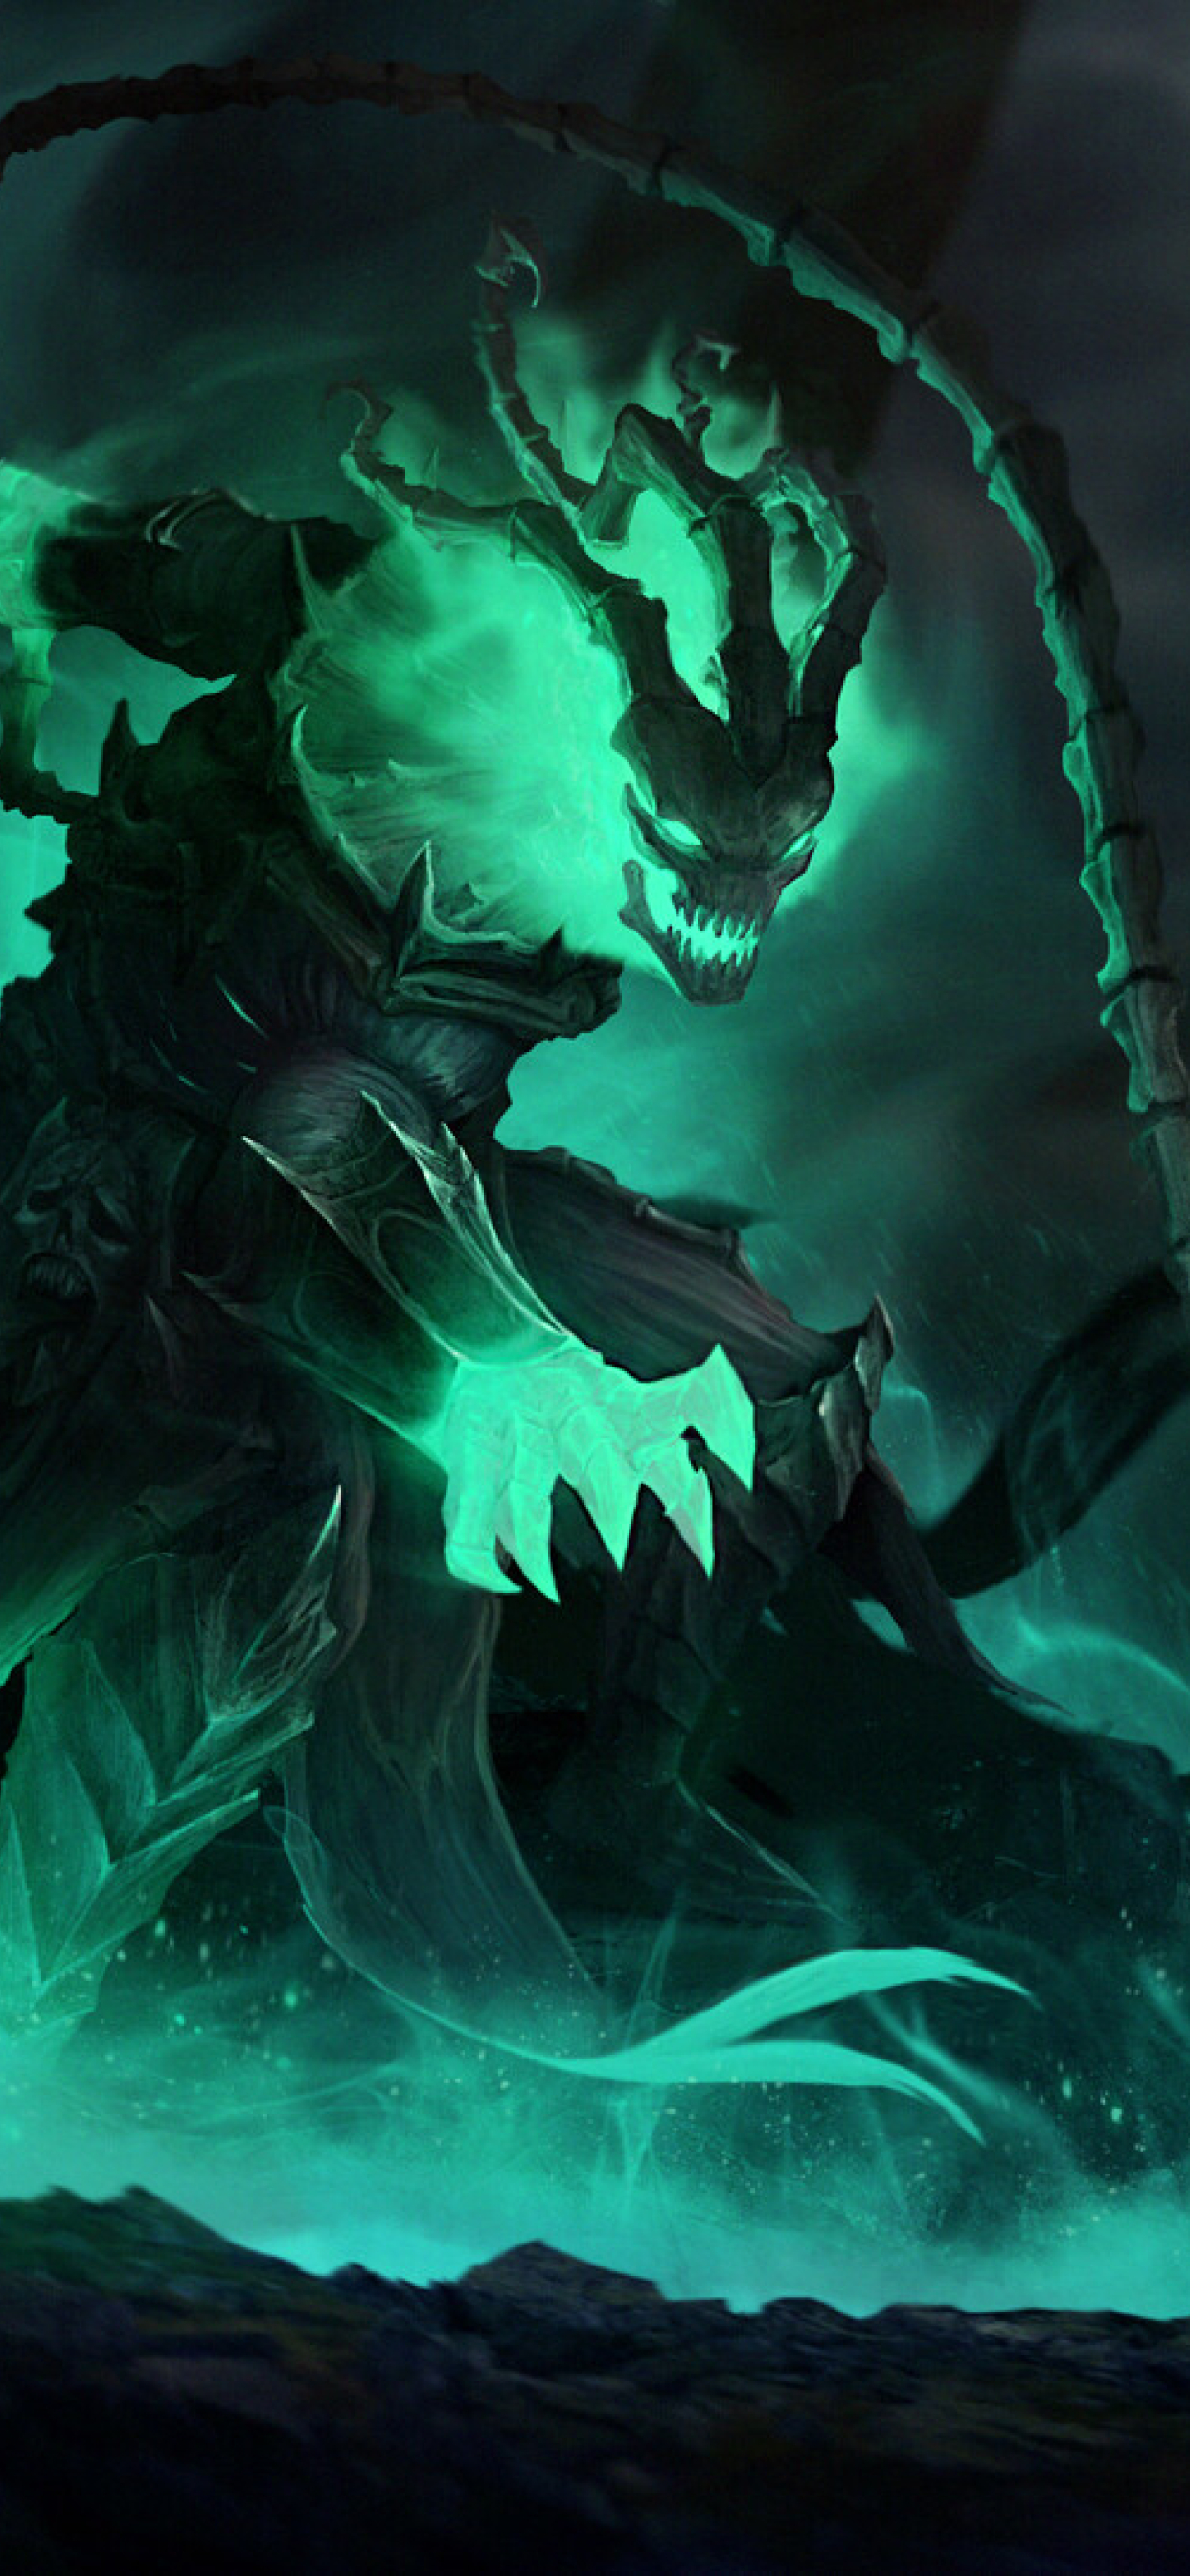 1242x26 Lucian Vs Thresh Lol Iphone Xs Max Wallpaper Hd Games 4k Wallpapers Images Photos And Background